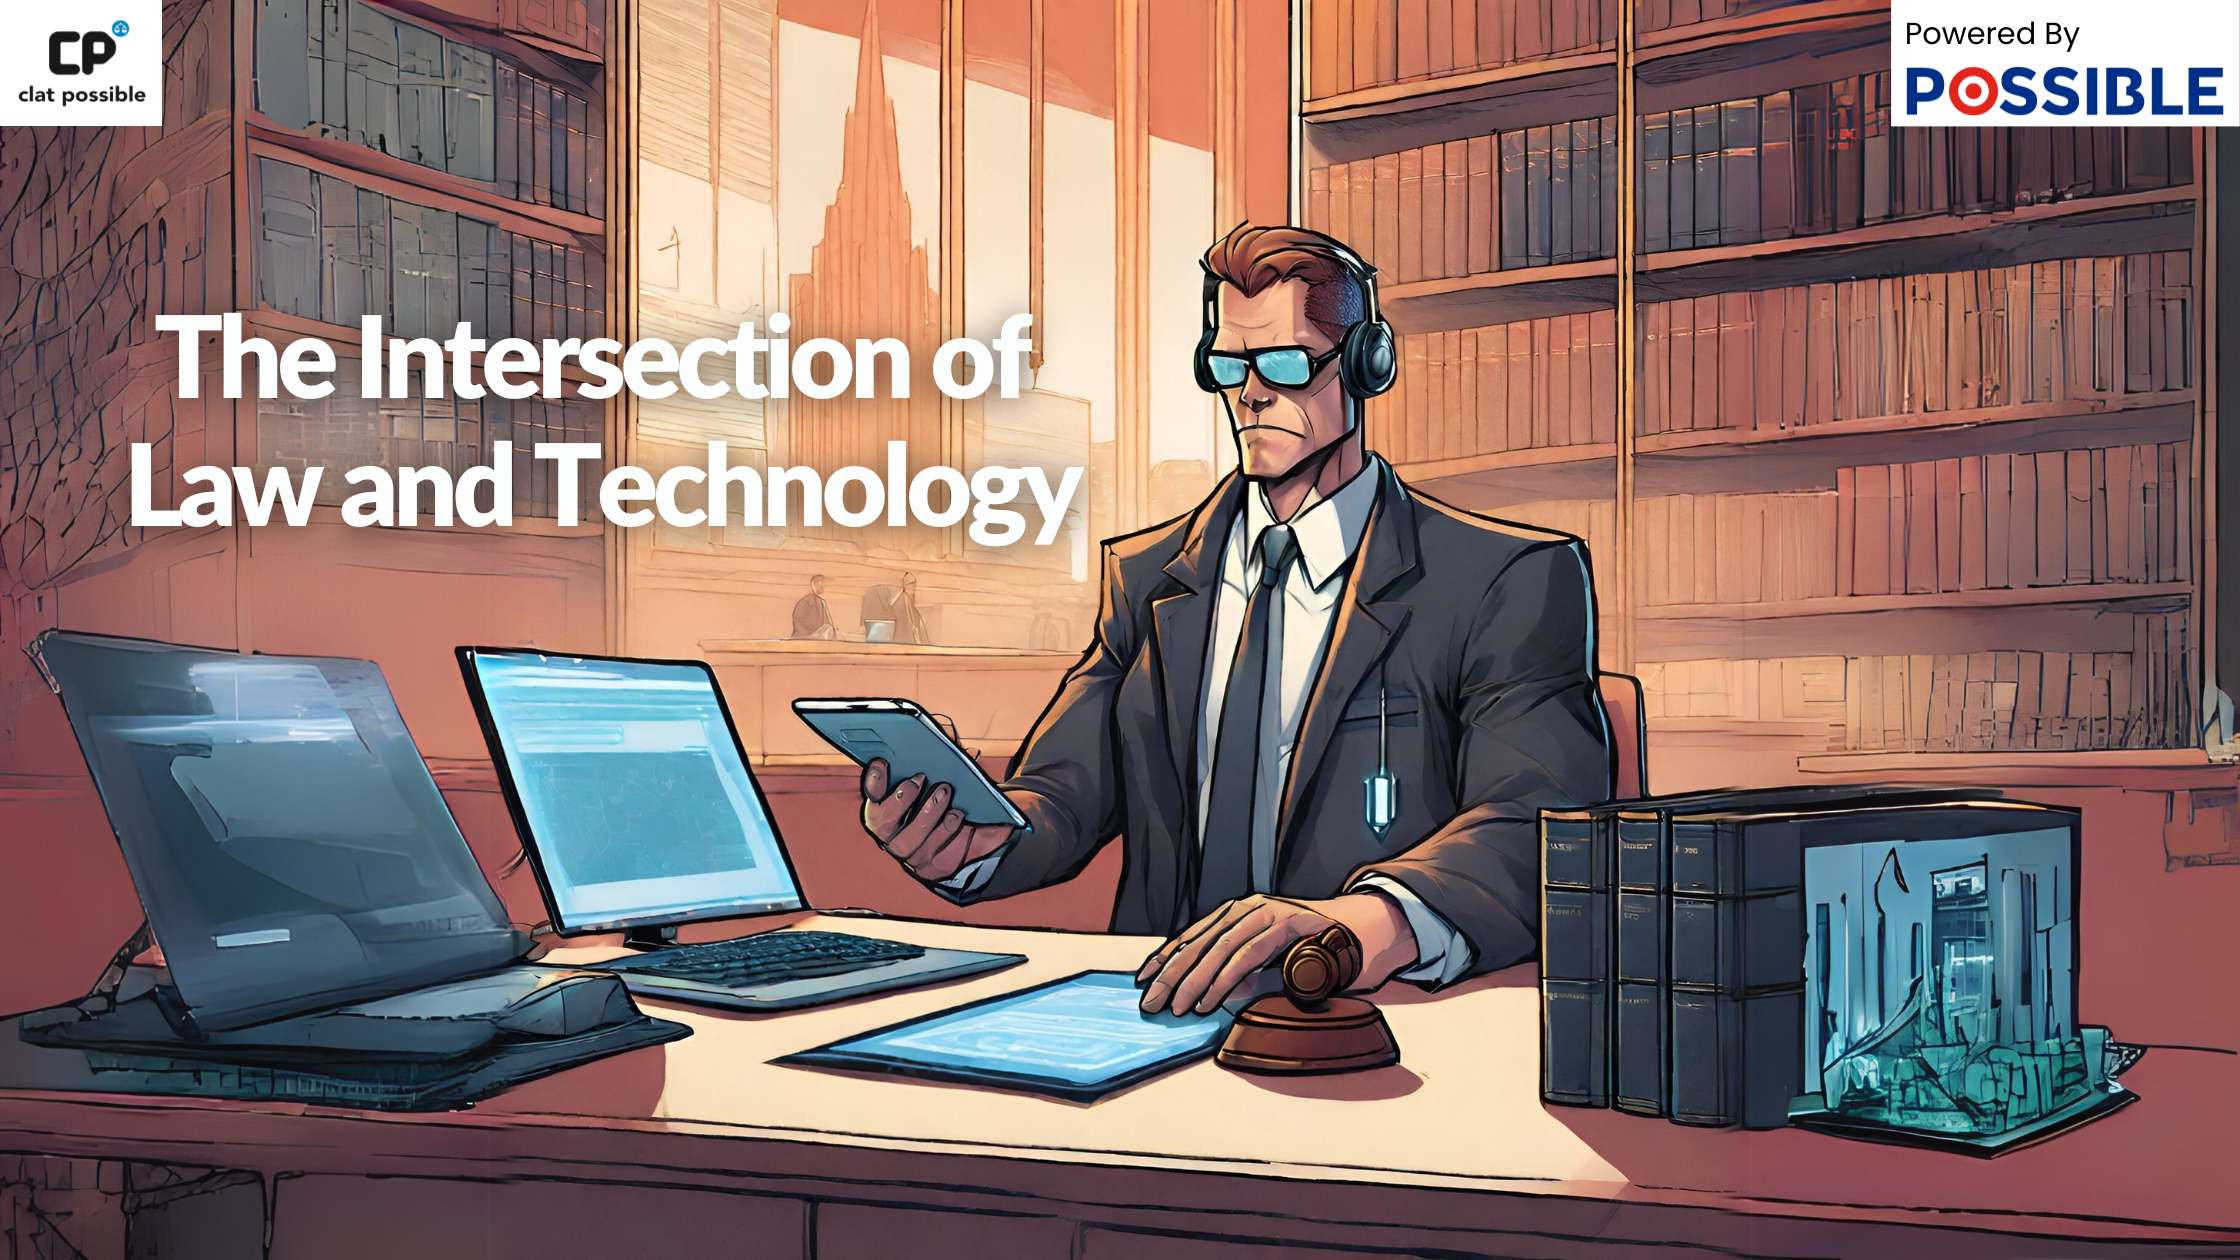 The Intersection of Law and Technology